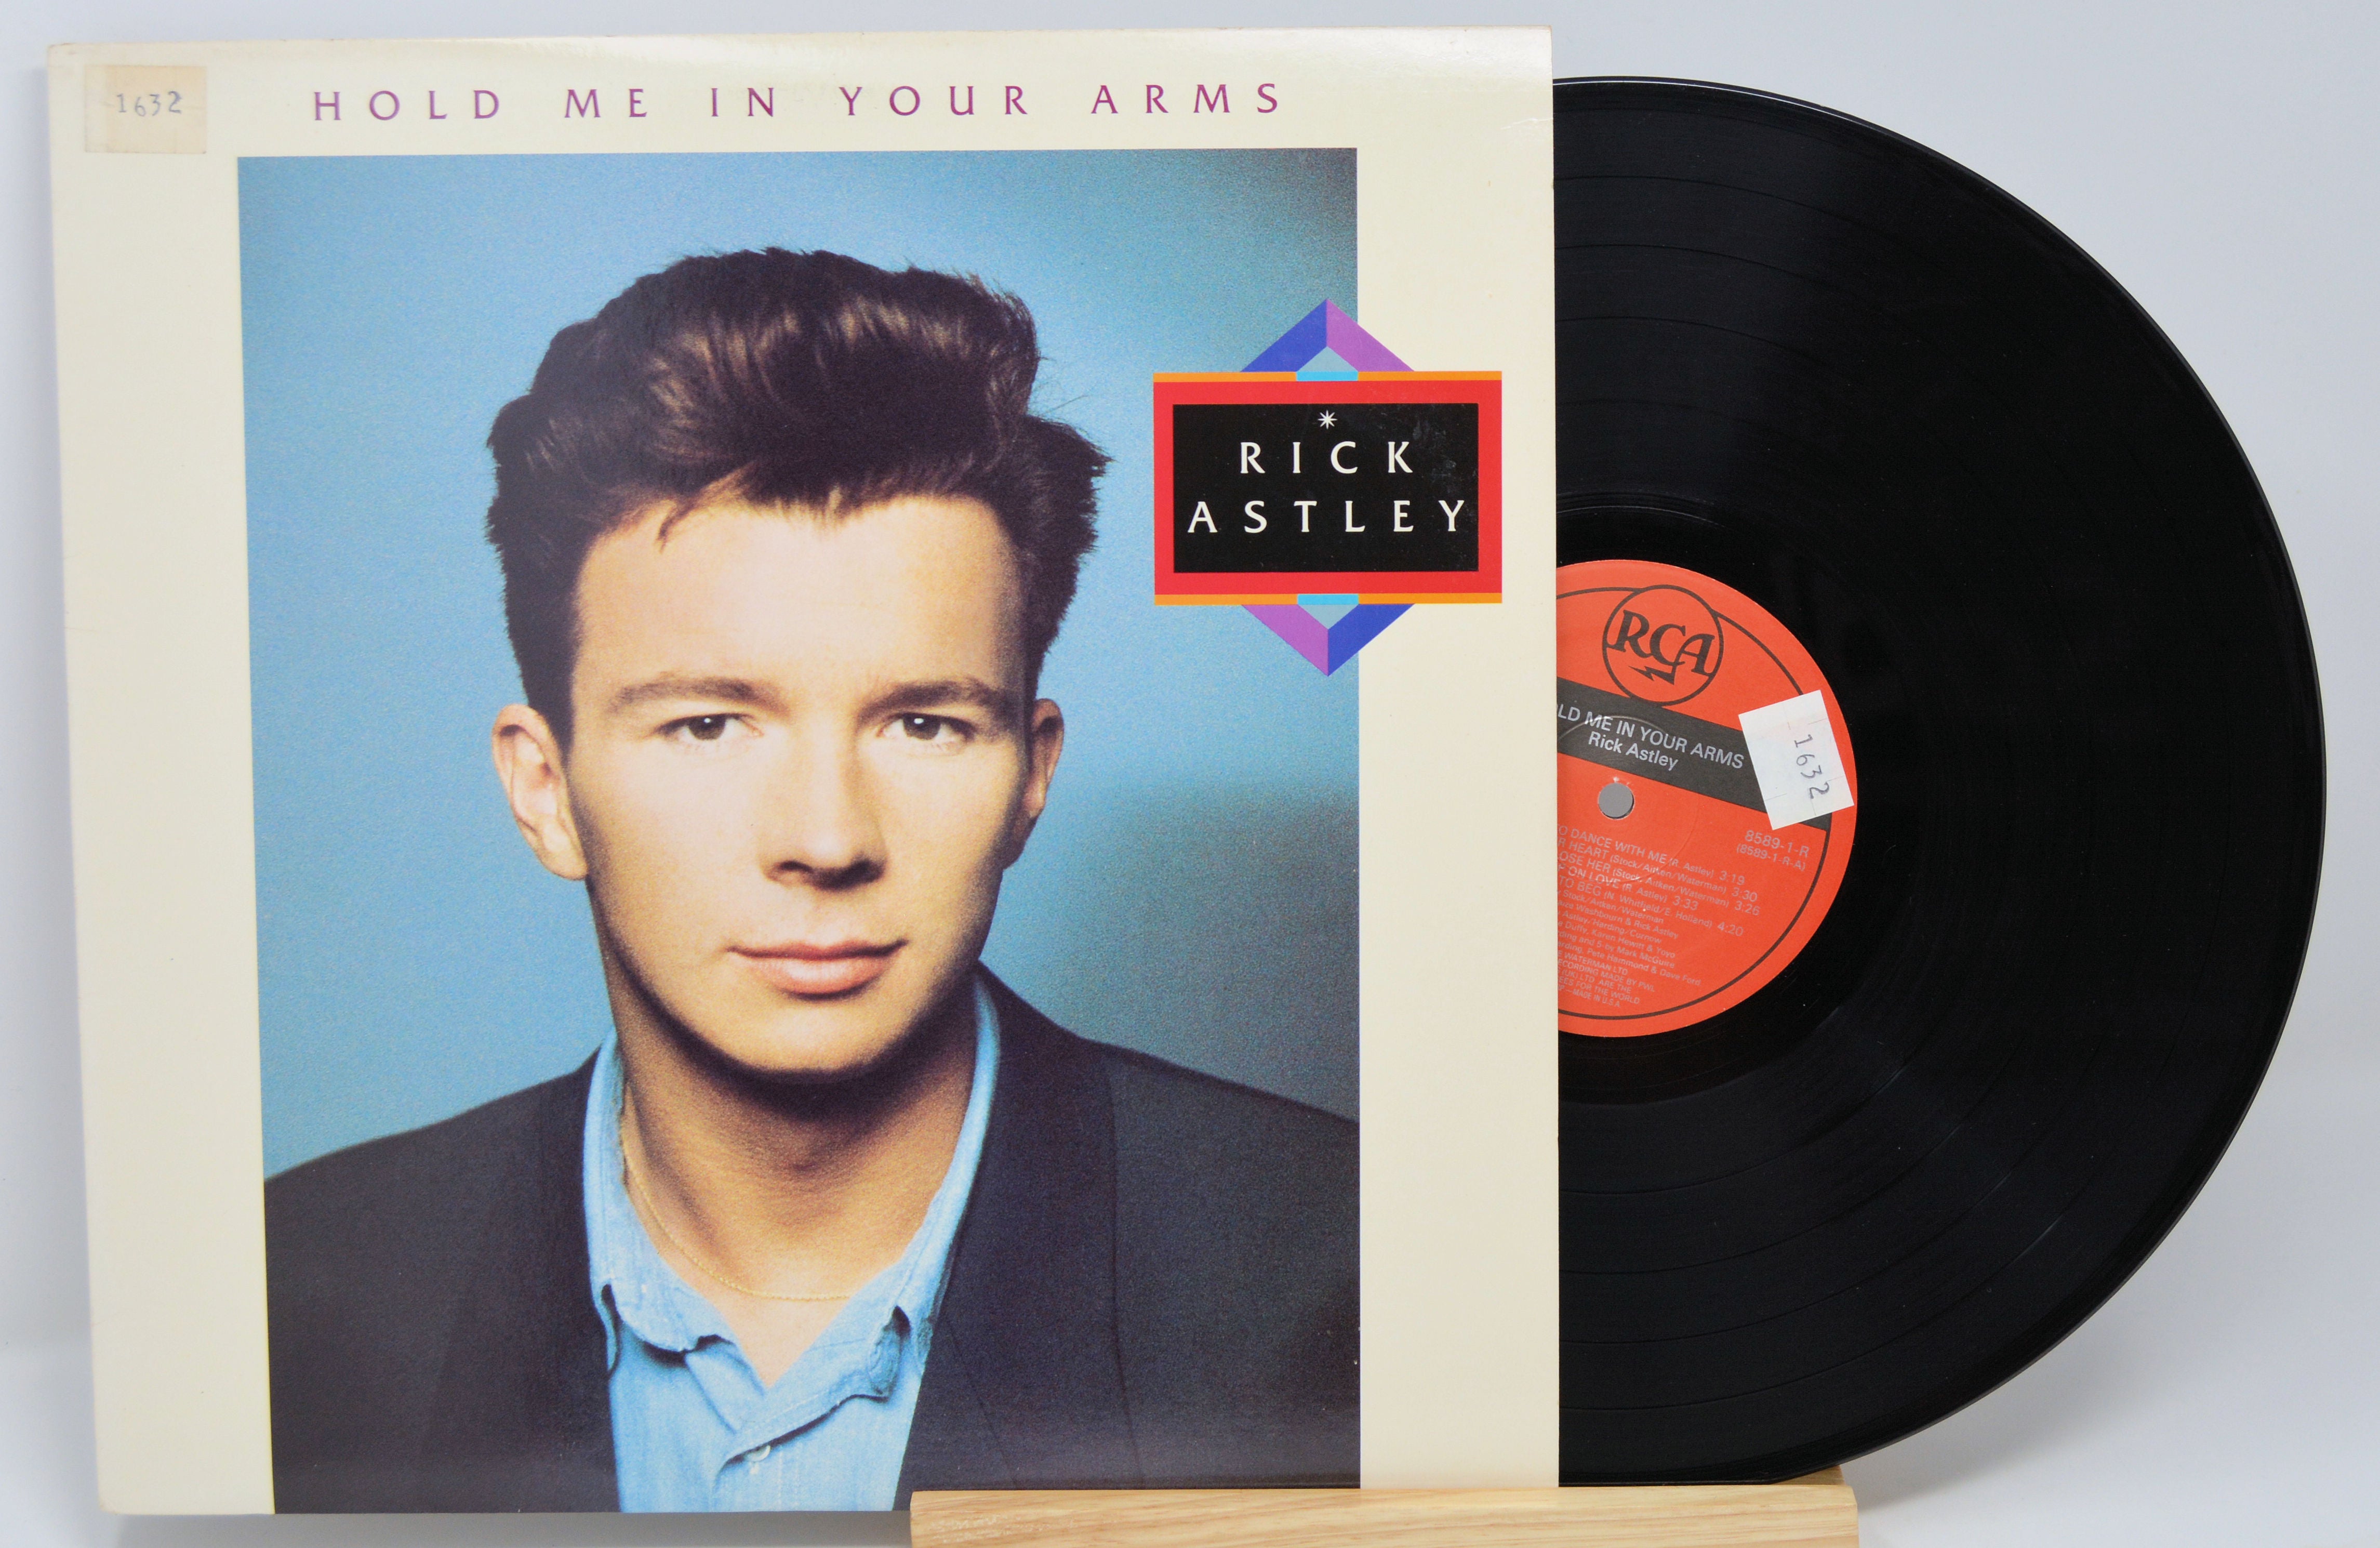 Rick Astley - Hold Me In Your Arms, Vinyl Record Album LP, BMG – Joe's ...